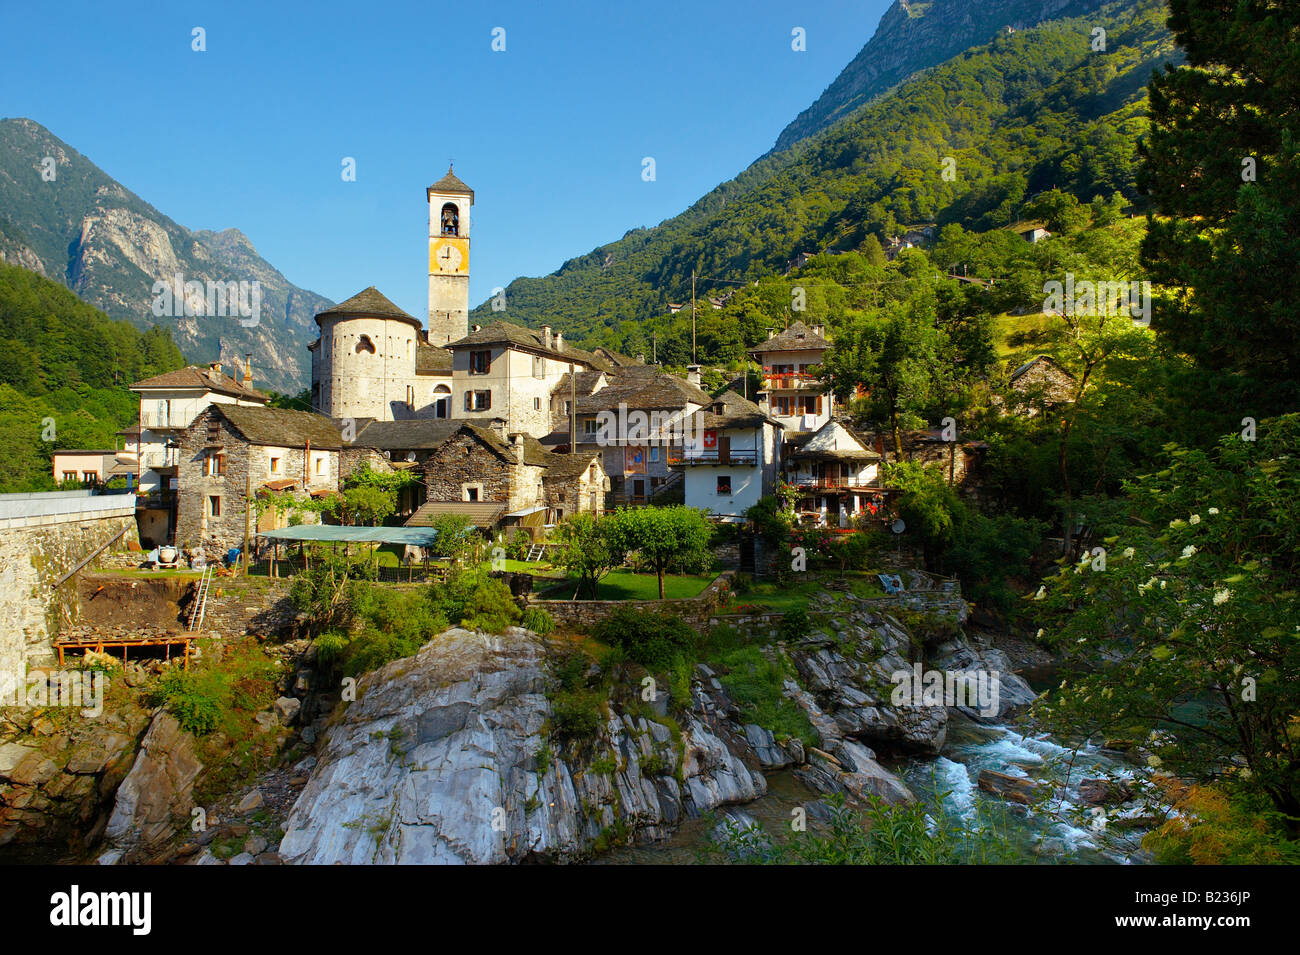 Rustic mountain village of Lavertezza with stone houses and church -Val Verzasca, Ticino, Alps, Stock Photo